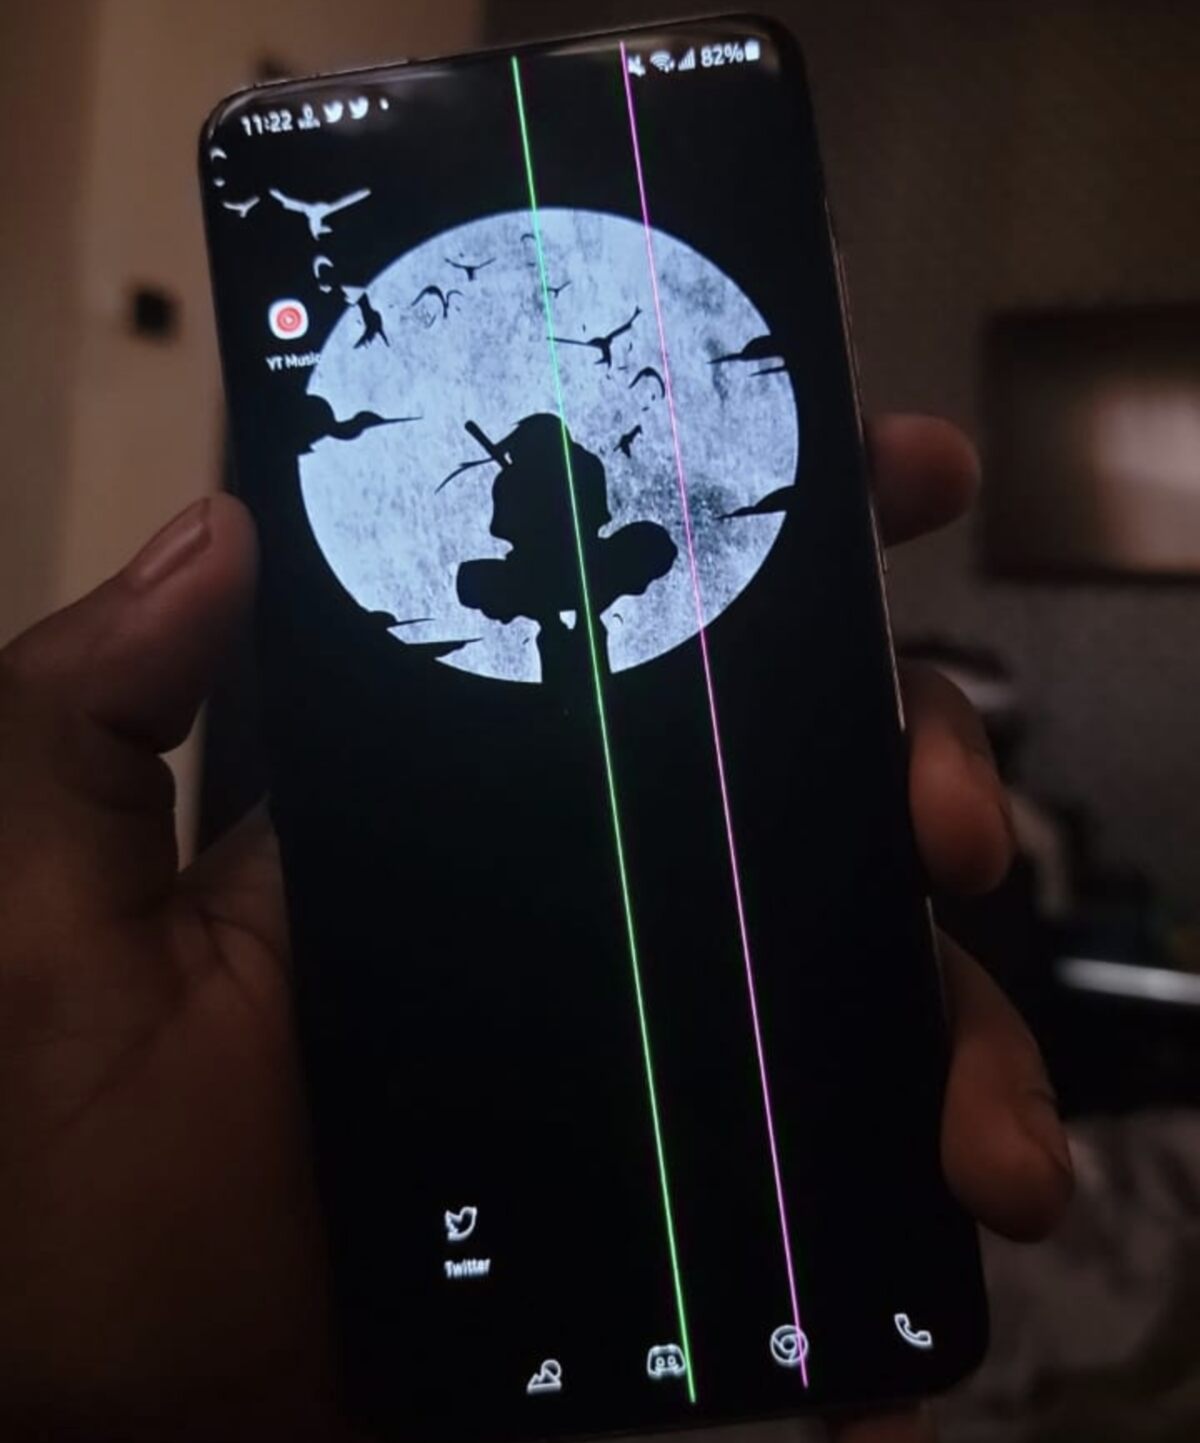 How To fix the Green Line on an Android Phone